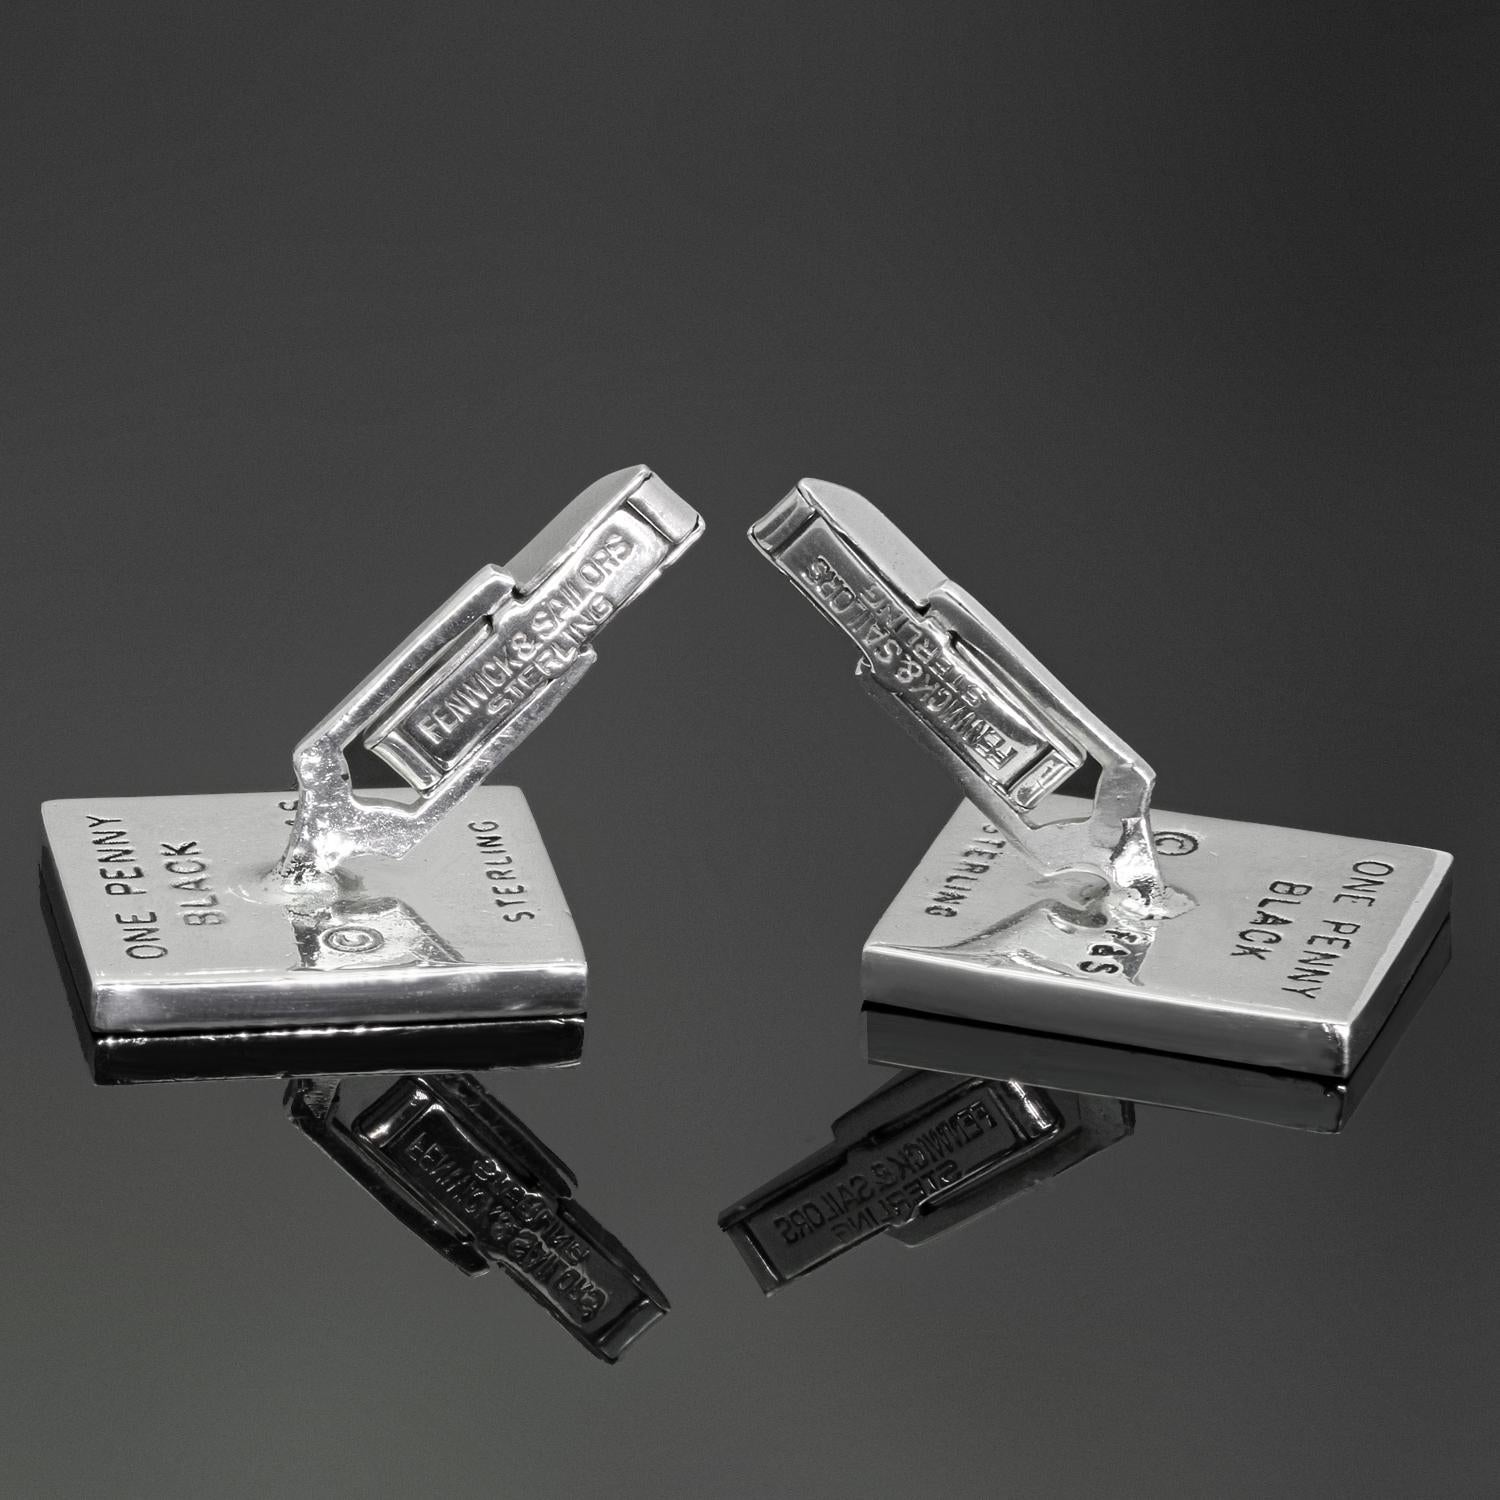 These Fenwick & Sailors One Penny Black Postage Stamp Cufflinks are artisanally crafted in sterling silver with British One Penny Black Postage Stamp. A sophisticated mid-Century Edwardian Revival style with a Victorian Gothic flair from this well